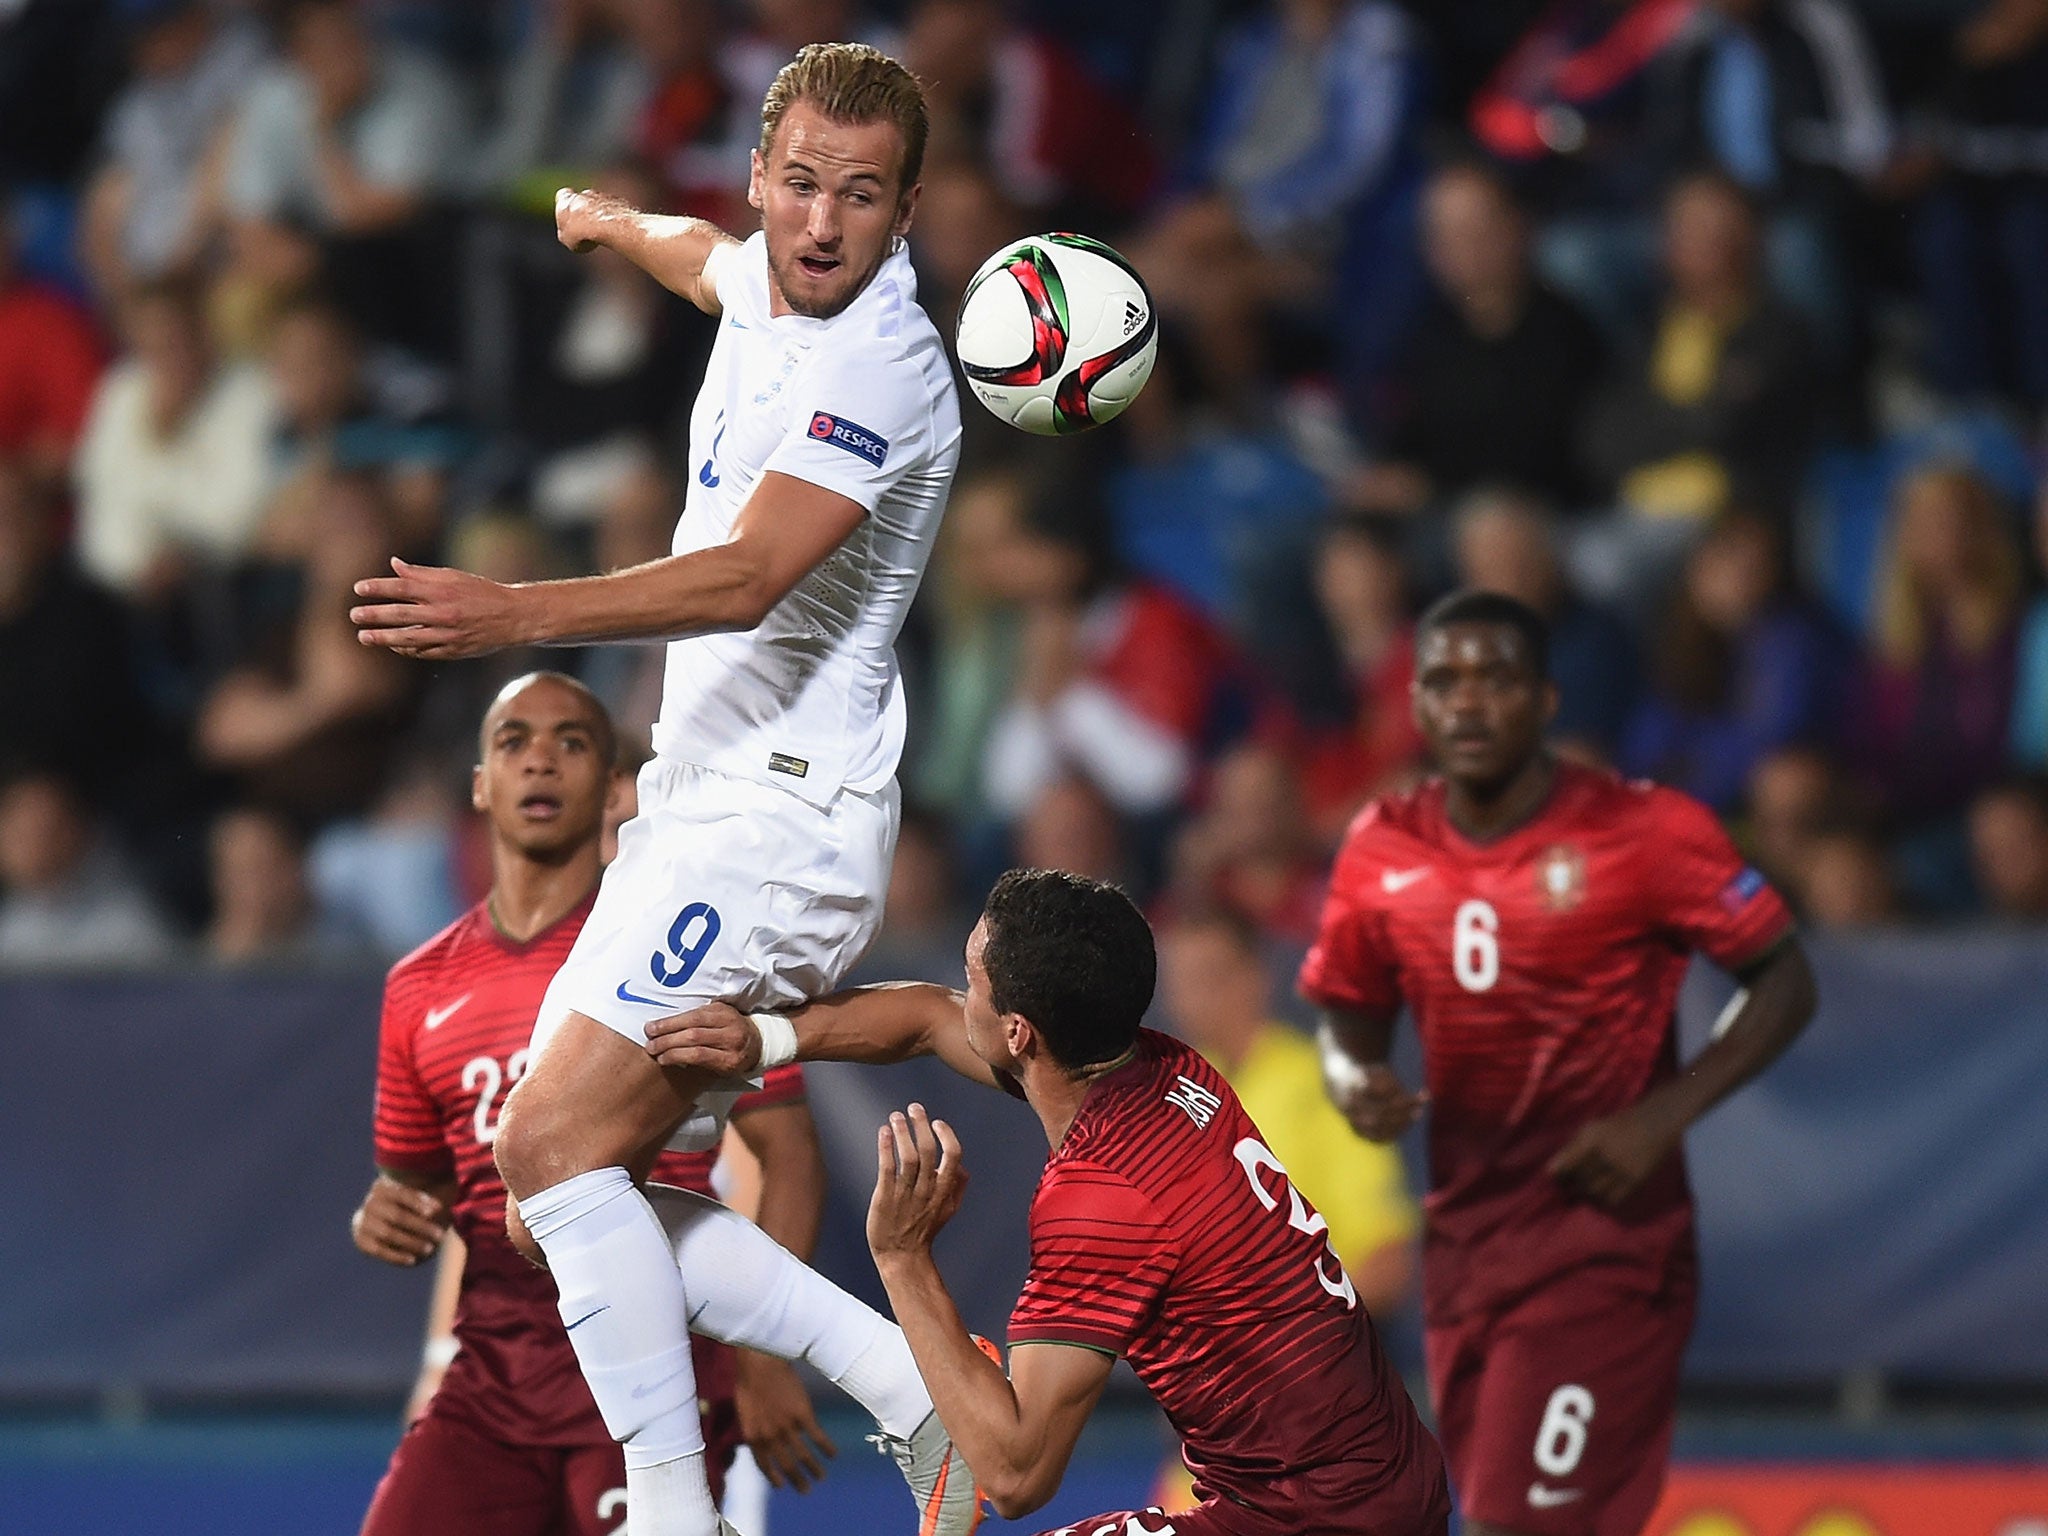 England Under-21 striker Harry Kane heads towards goal during the defeat to Portugal